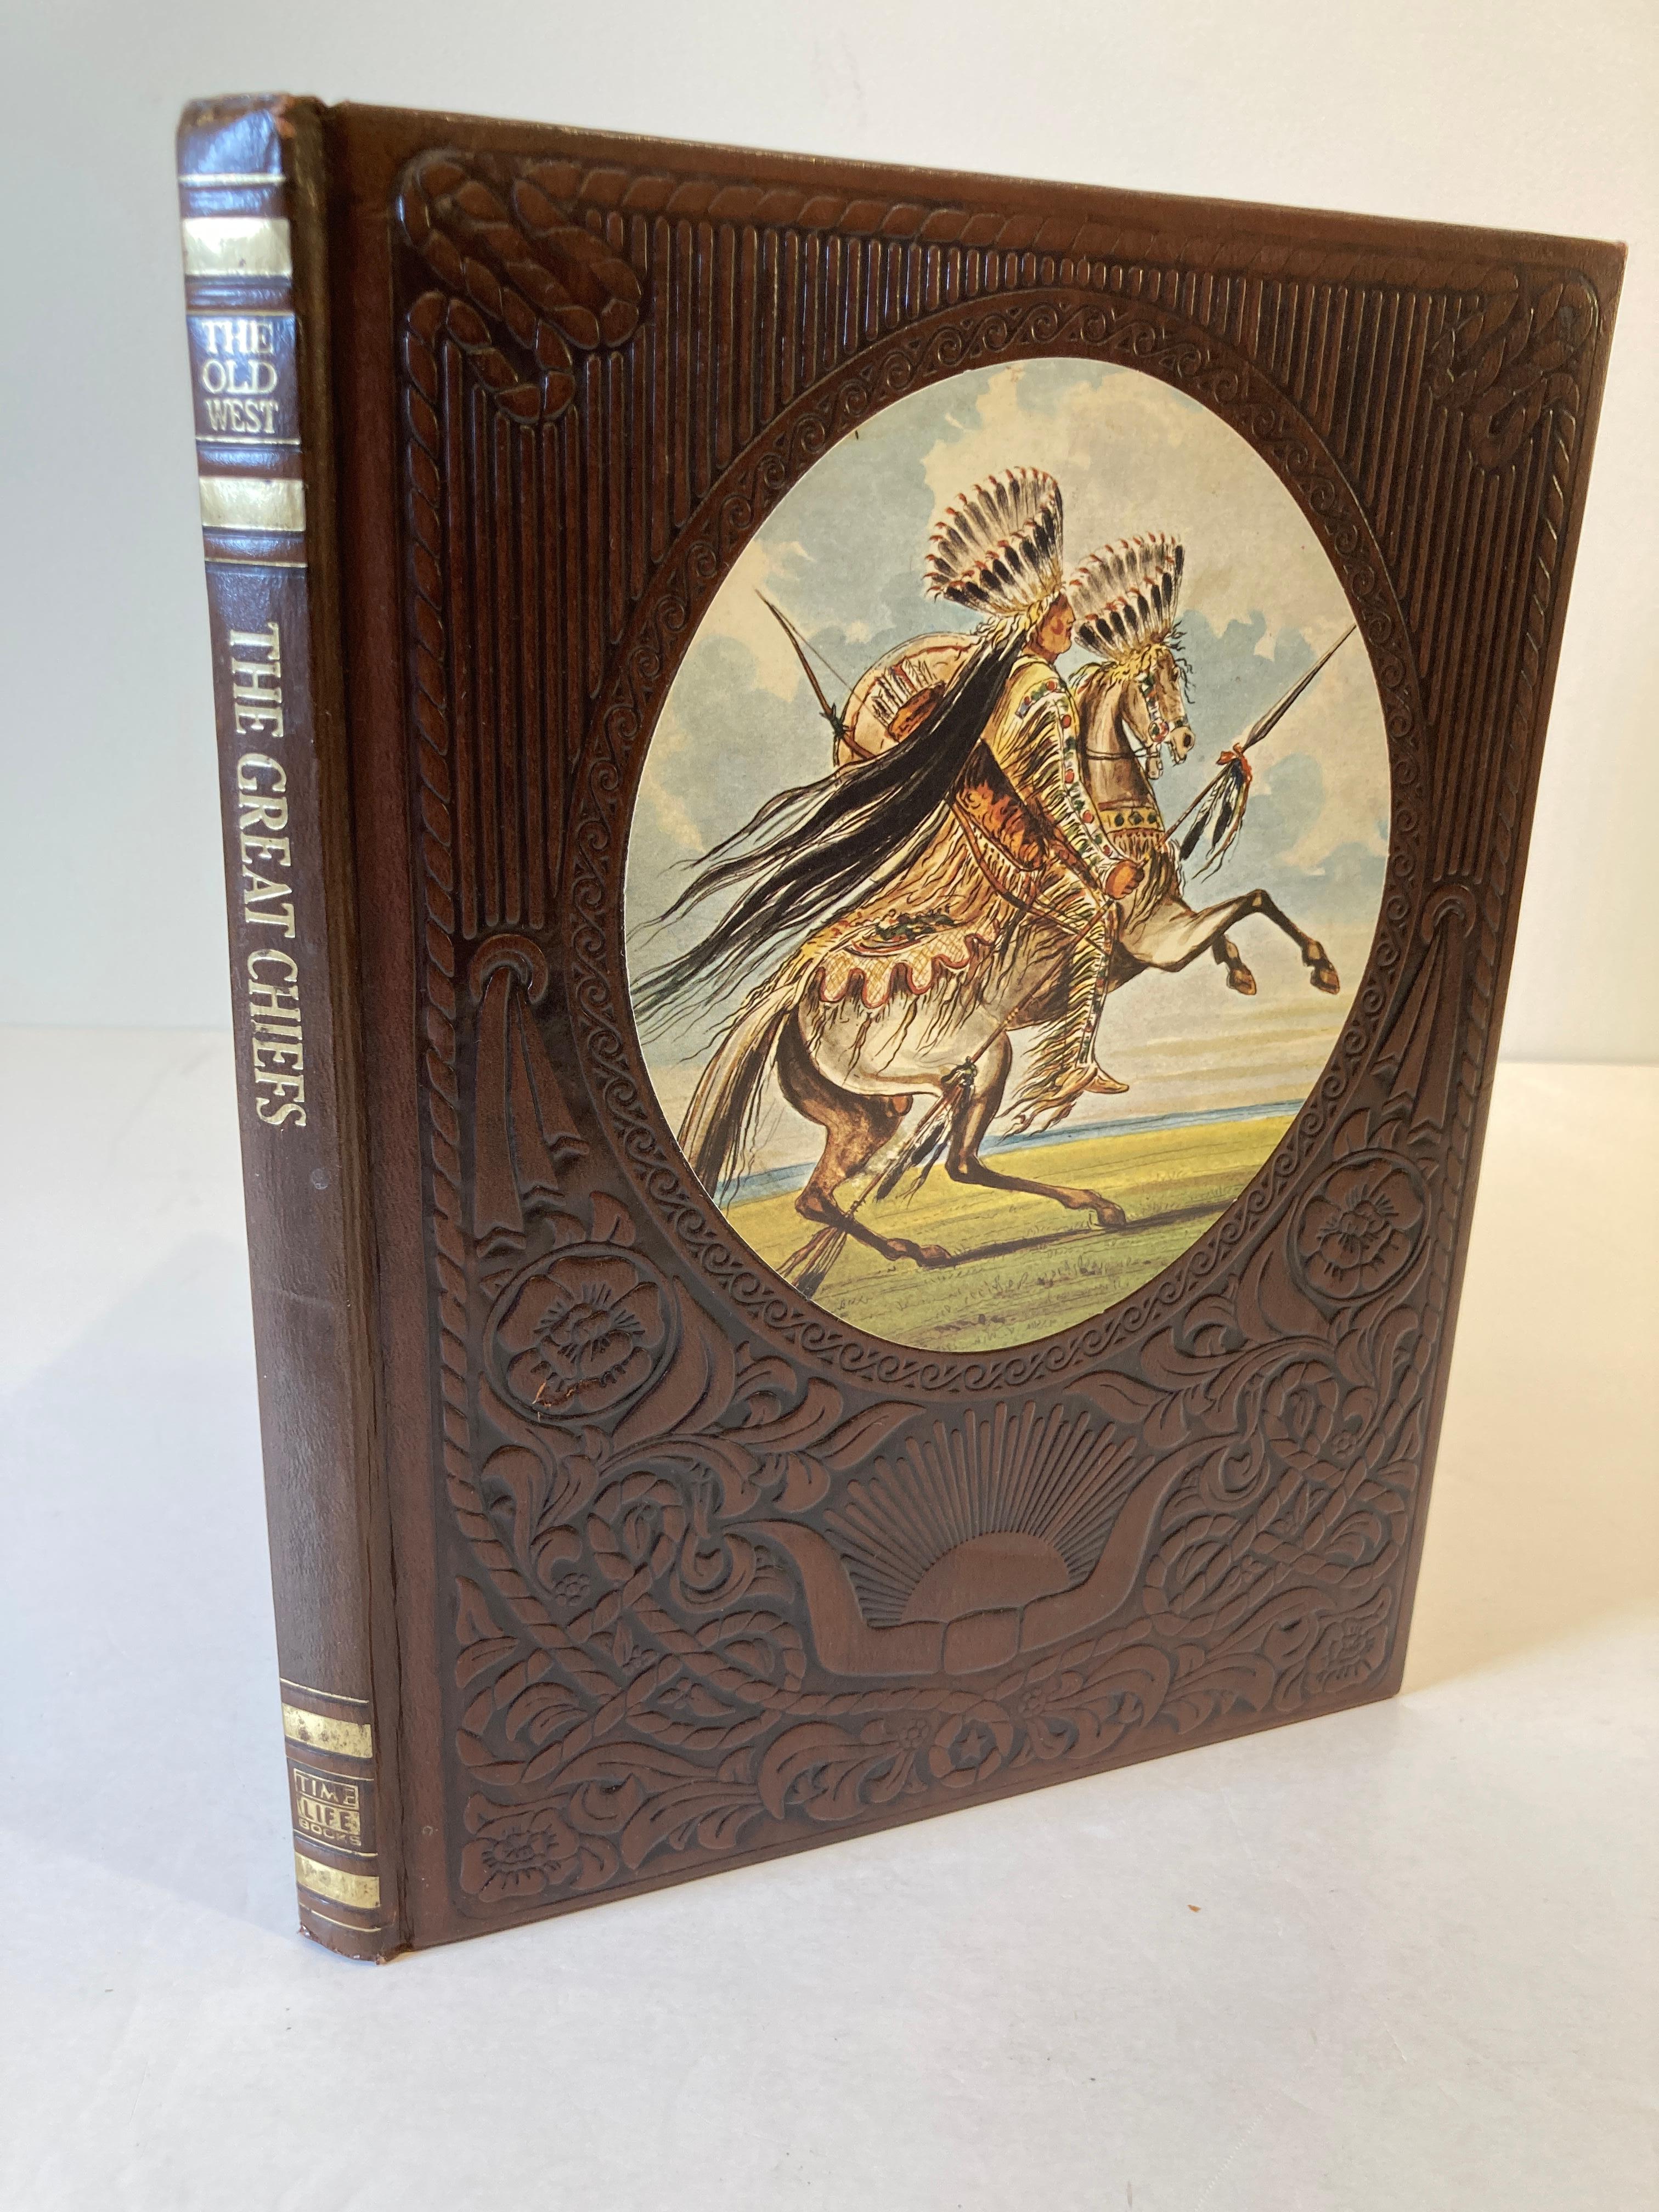 The Great Chiefs Old West Book Series 1977 Time Life Books.
Time Life Books The Great Chiefs Old West Book Series.
Cover is vinyl but looks like hand tooled leather.
Chapters include: An assembly of eagles; guerrilla fighters in a rugged domain;